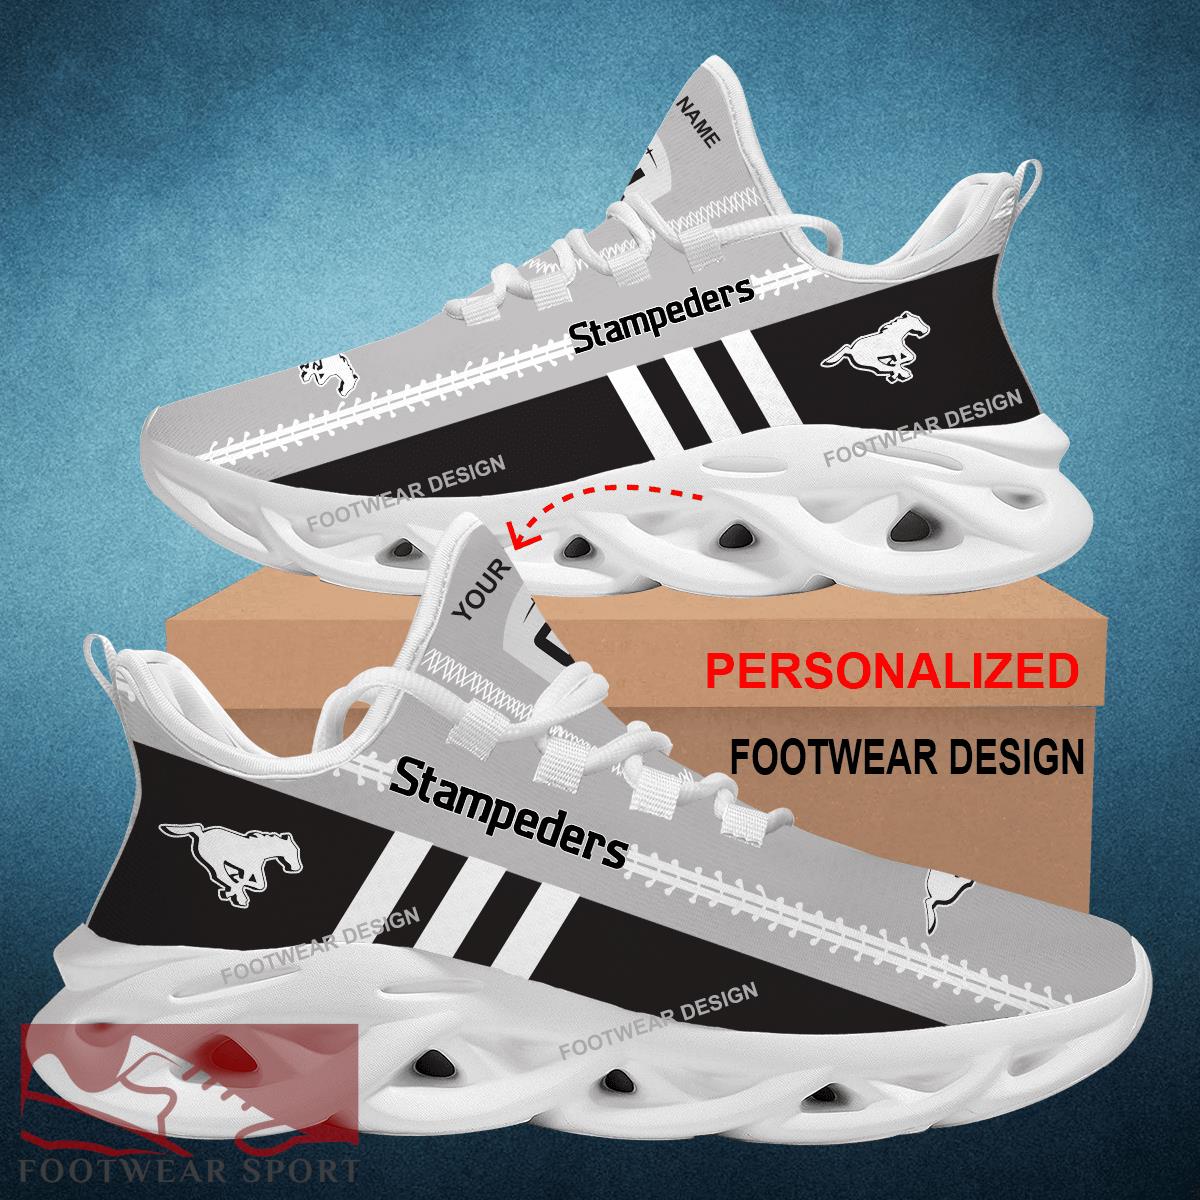 CFL Calgary Stampeders Chunky Shoes New Design Gift Fans Max Soul Sneakers Personalized - CFL Calgary Stampeders Logo New Chunky Shoes Photo 2